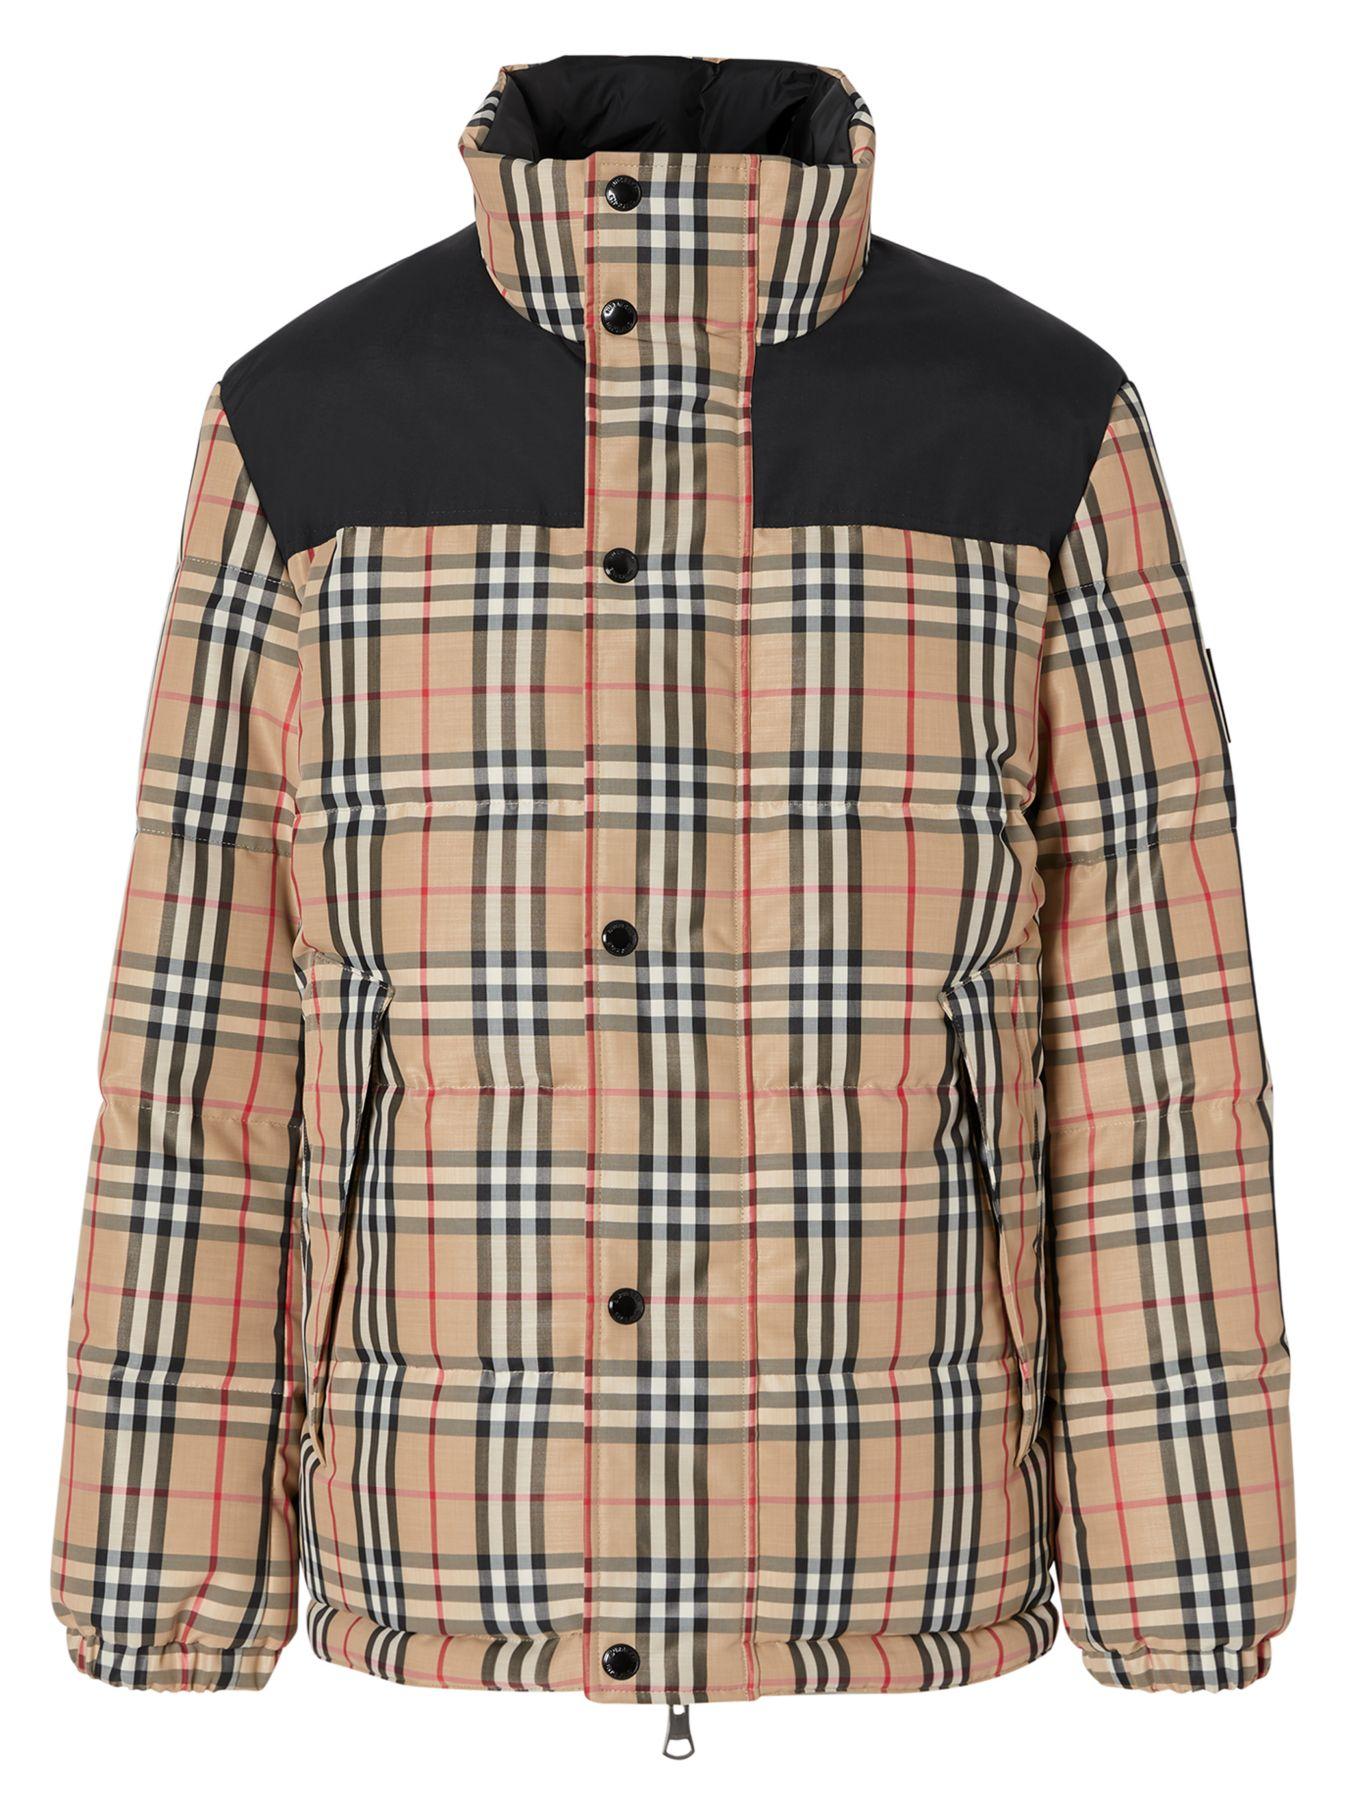 Burberry Synthetic Vintage Check Puffer Jacket for Men - Lyst